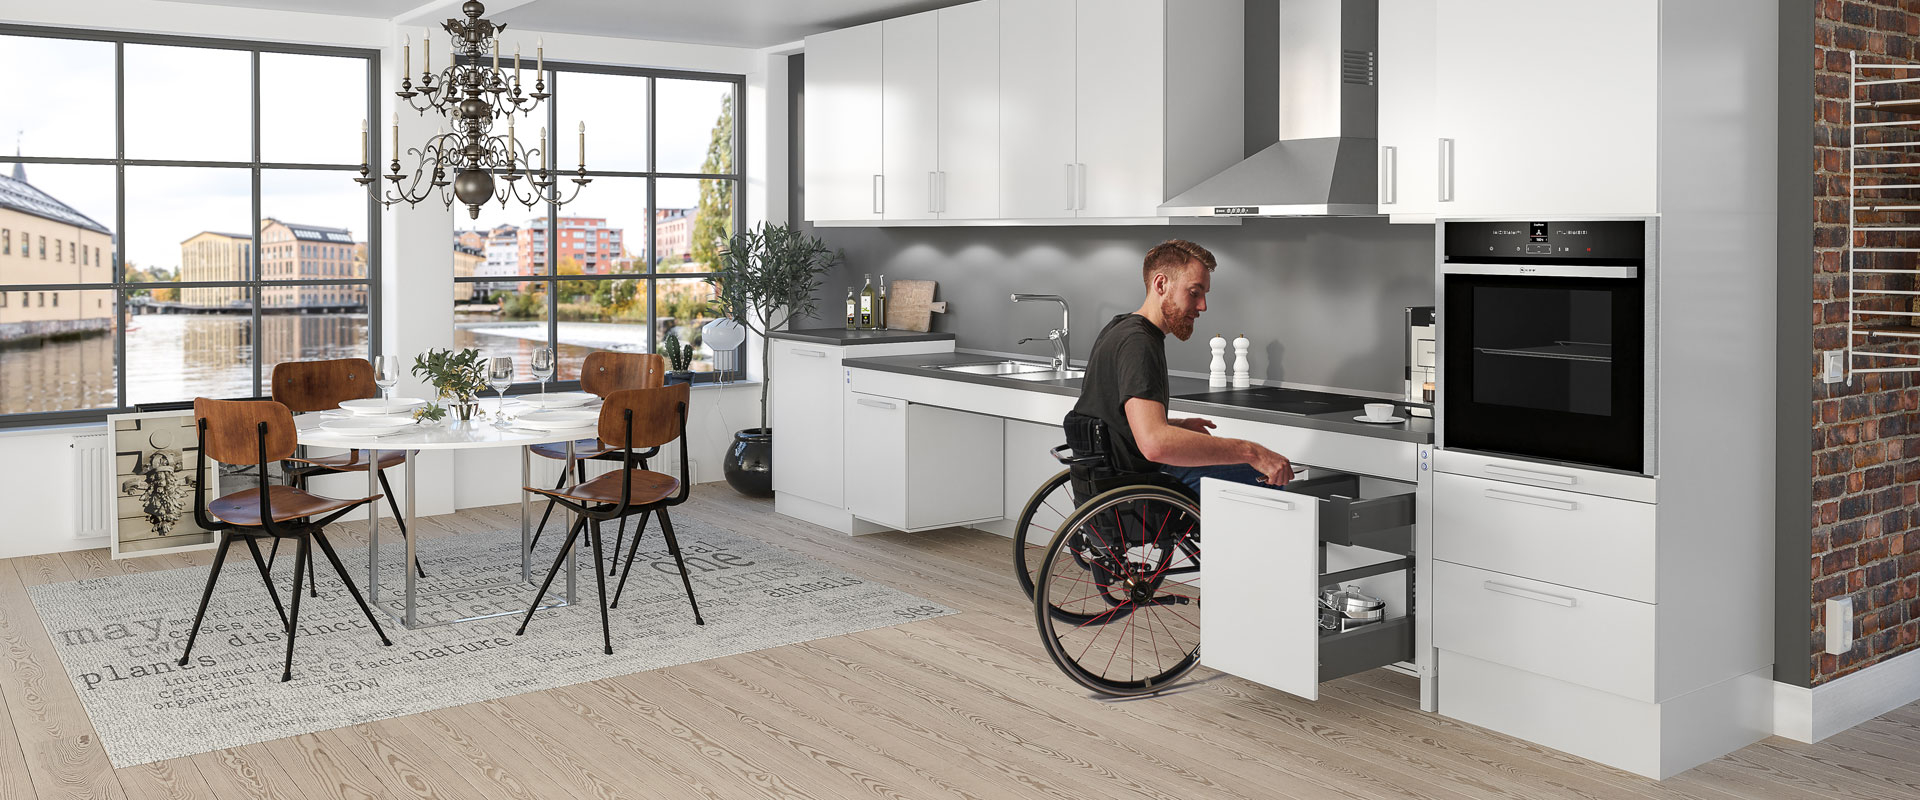 An ADA Kitchen must be planned to give space for a wheelchair user. A good ADA Kitchen have for example pull out drawers, adjustable height shelves and countertops.